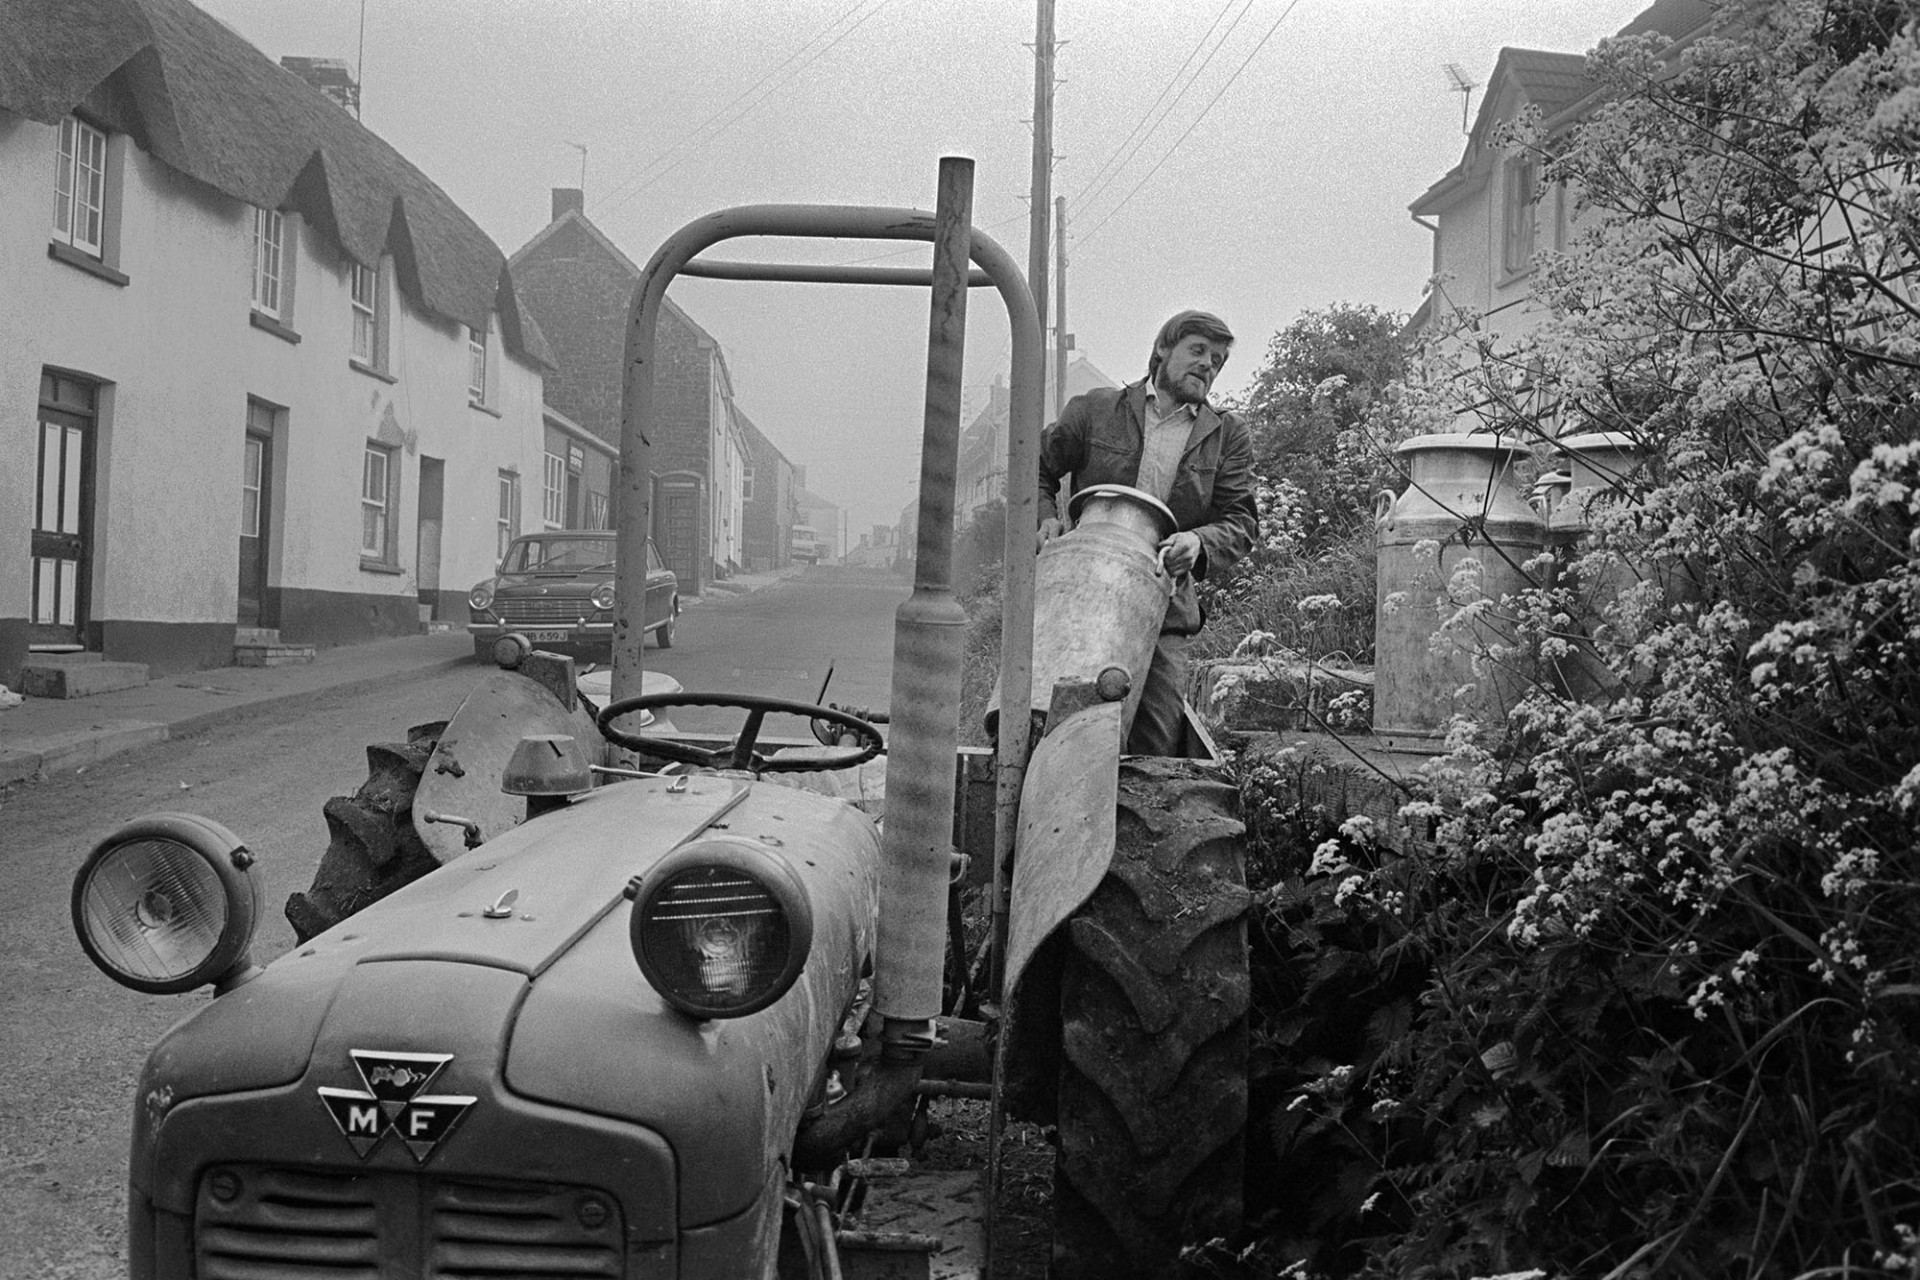 Farmer transferring milk churns to stand in village. 
[A man lifting milk churns from his tractor and link box onto a milk churn stand in the village of Sheepwash. Thatched cottages and a parked car are visible in the street.]